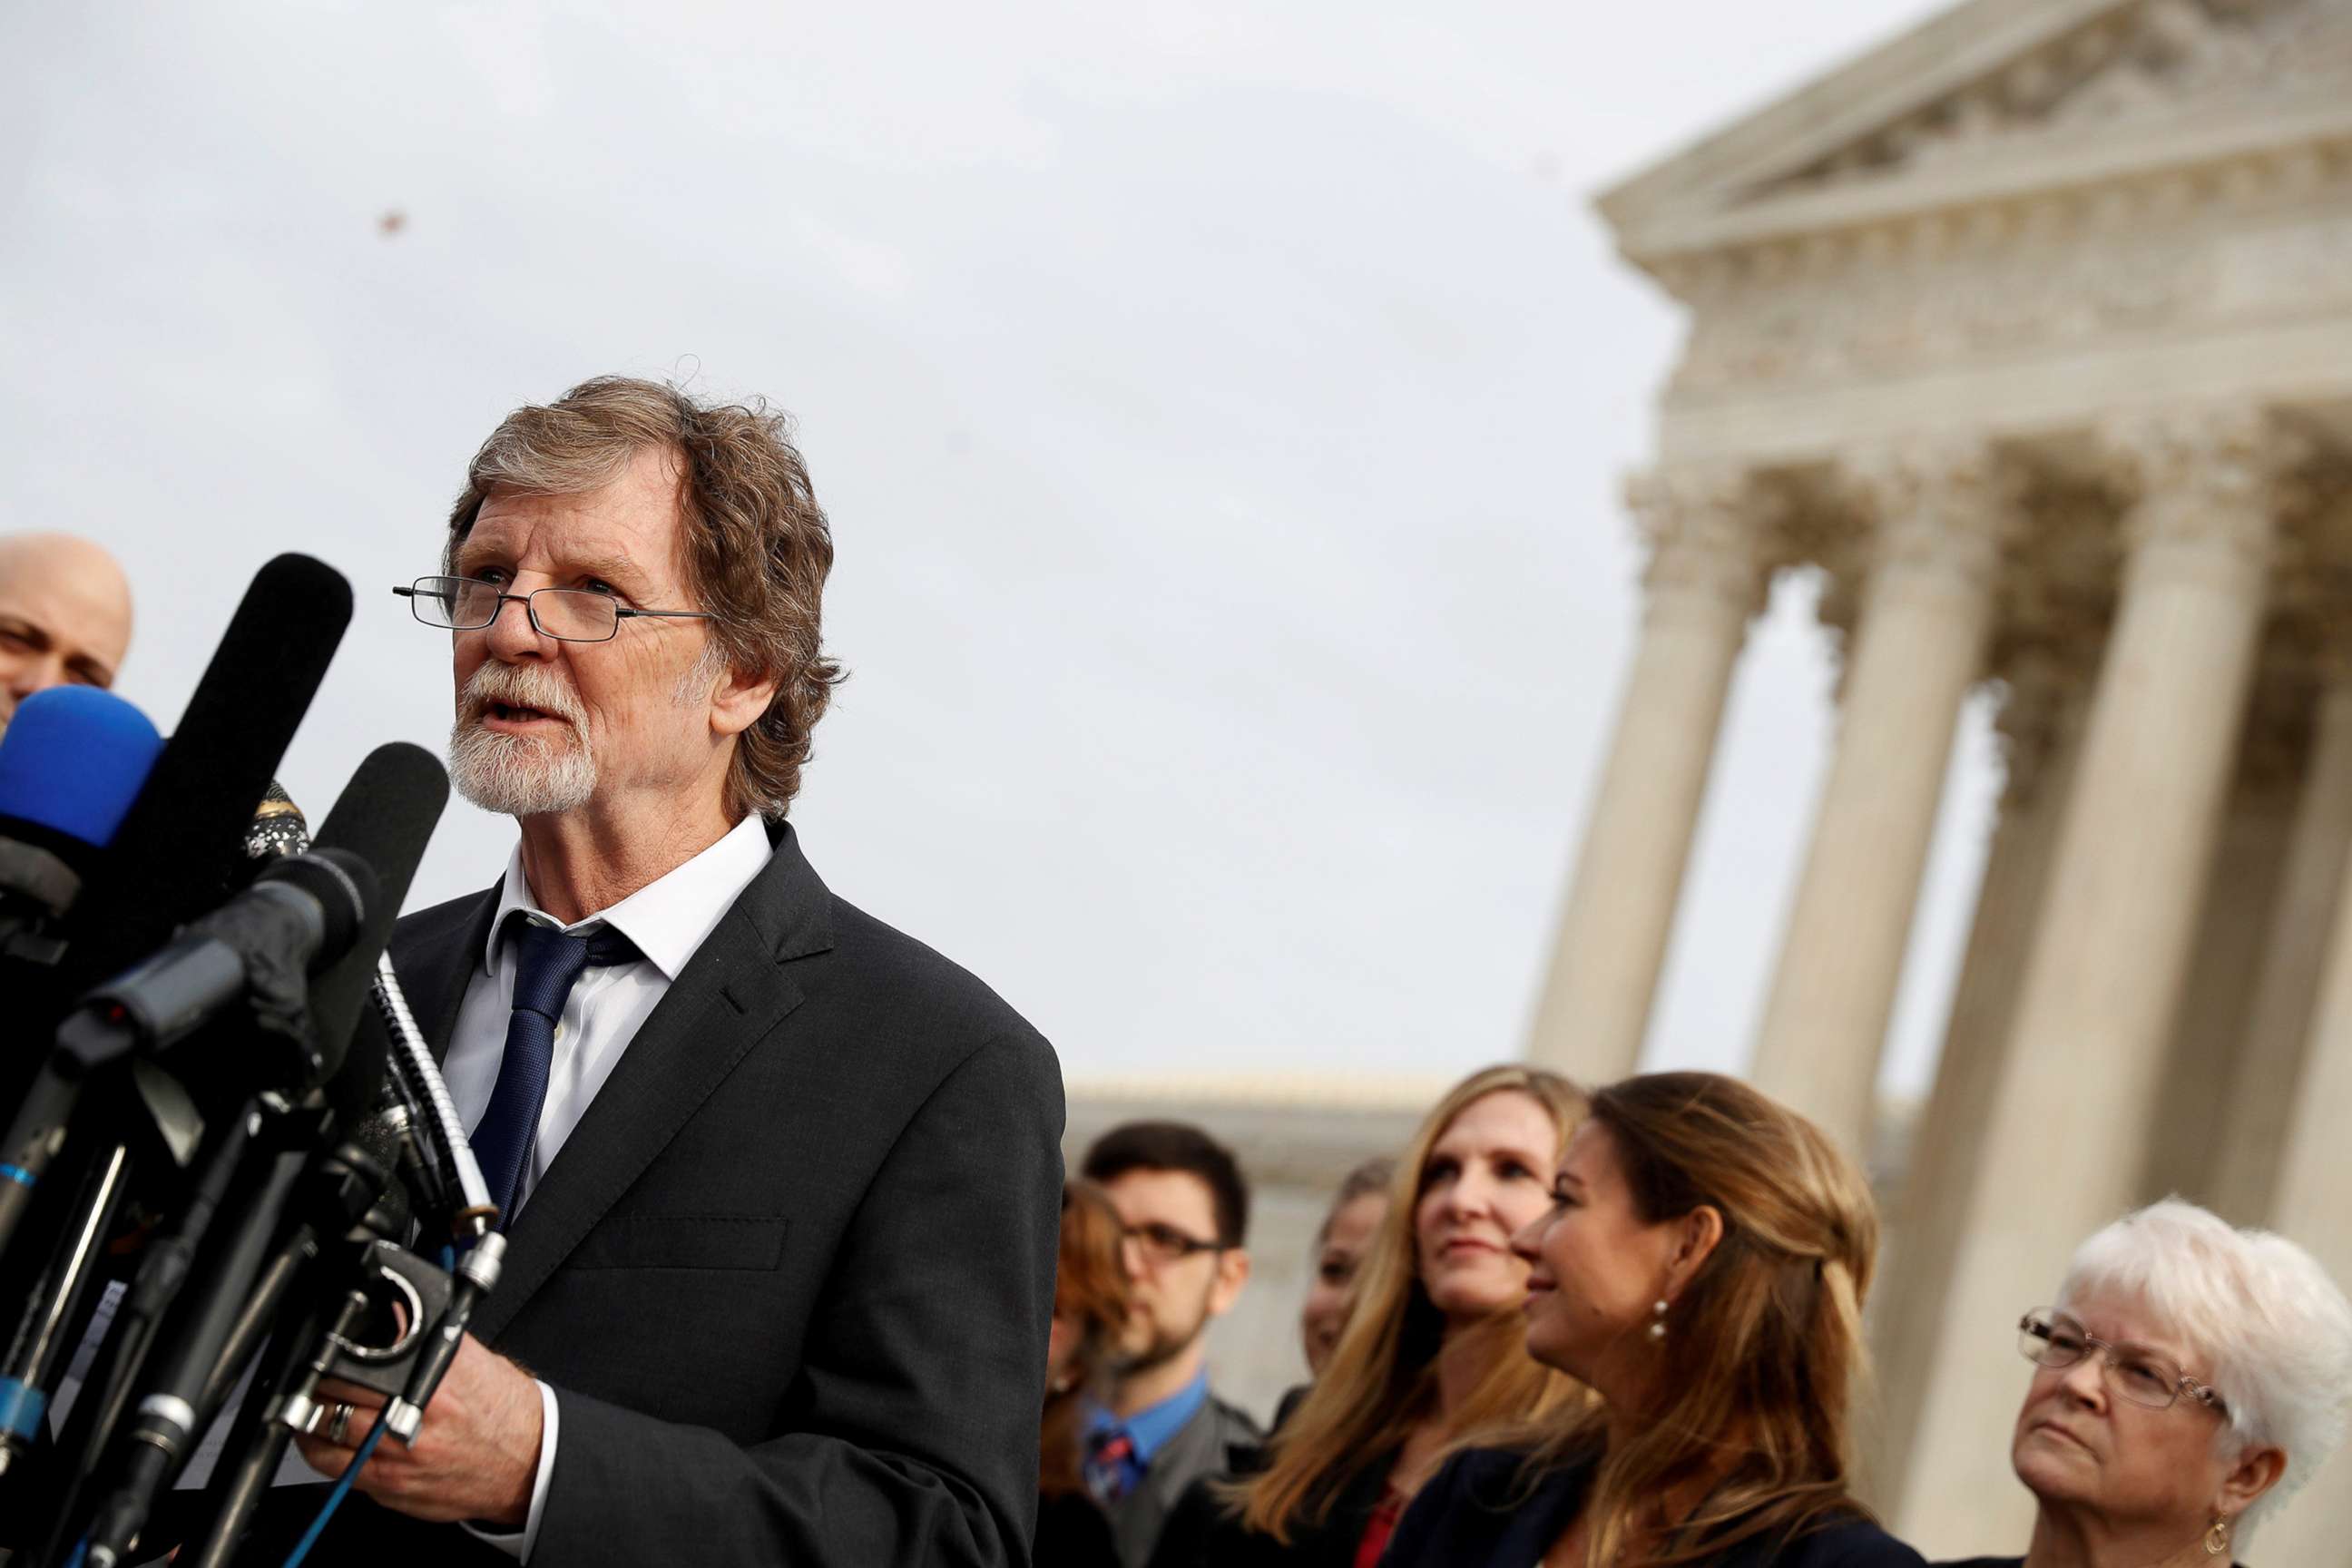 PHOTO: Baker Jack Phillips speaks with the media following oral arguments in the Masterpiece Cakeshop vs. Colorado Civil Rights Commission case at the Supreme Court in Washington, D.C., Dec. 5, 2017.